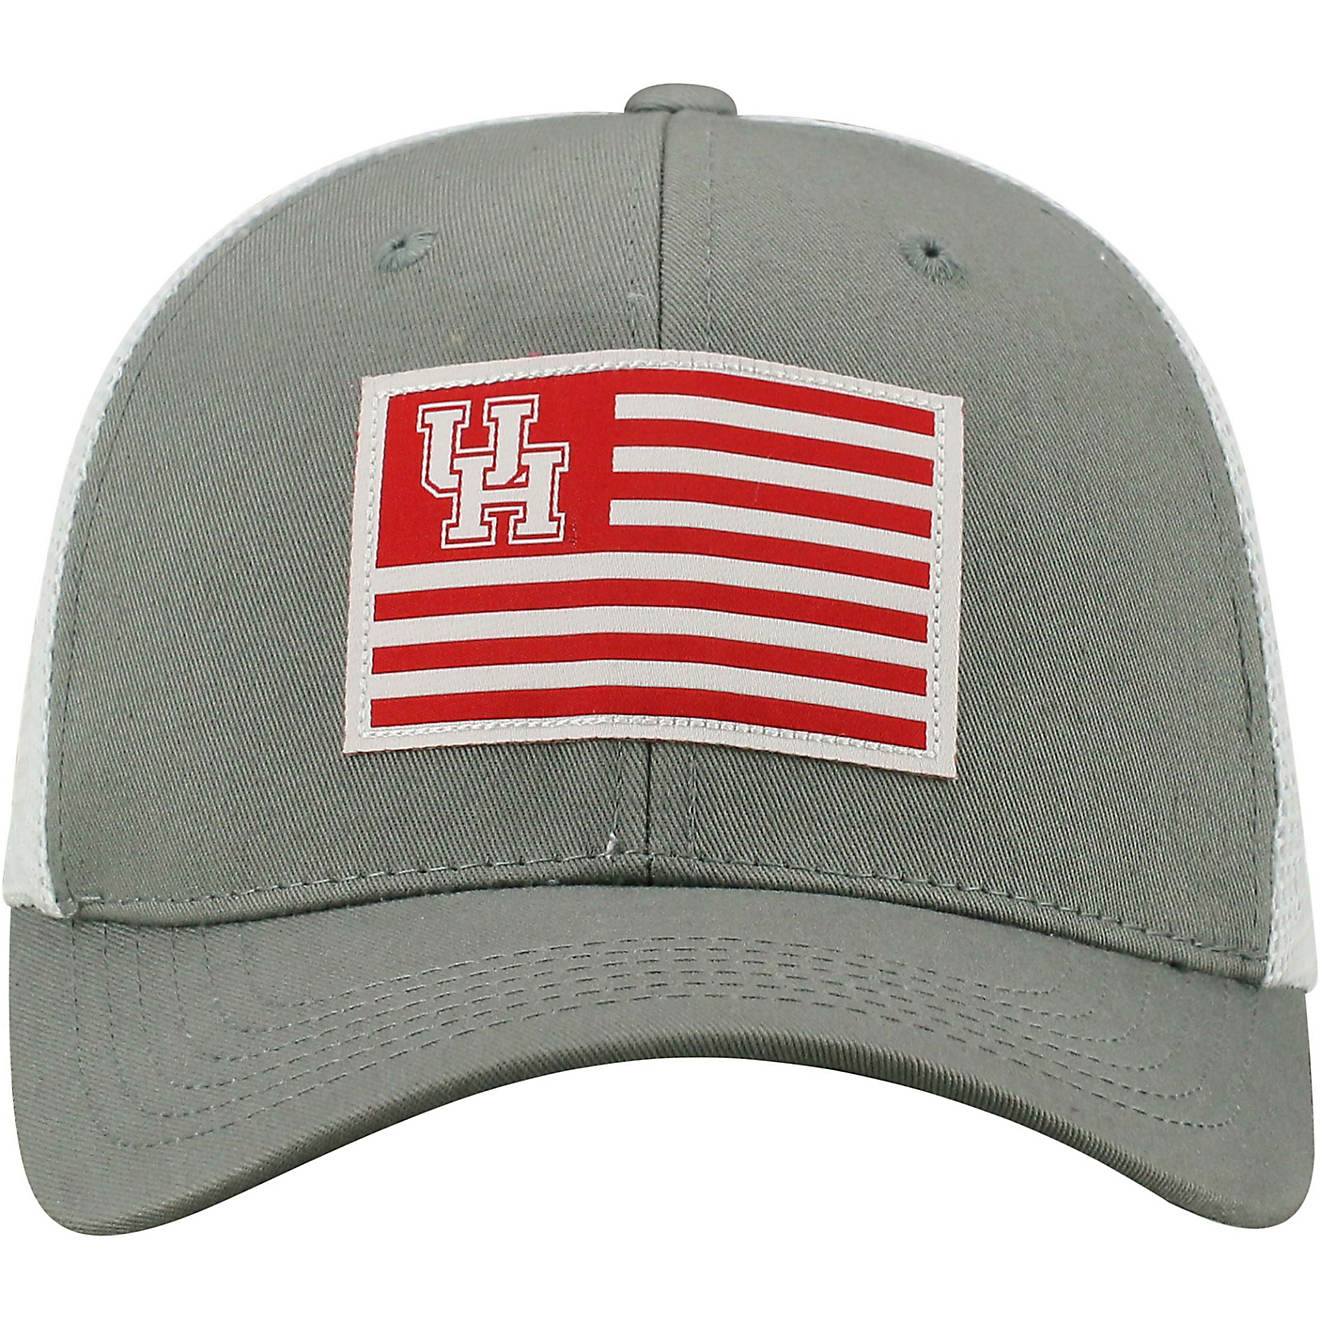 Top of the World Men's University of Houston Brave Snapback Cap                                                                  - view number 1